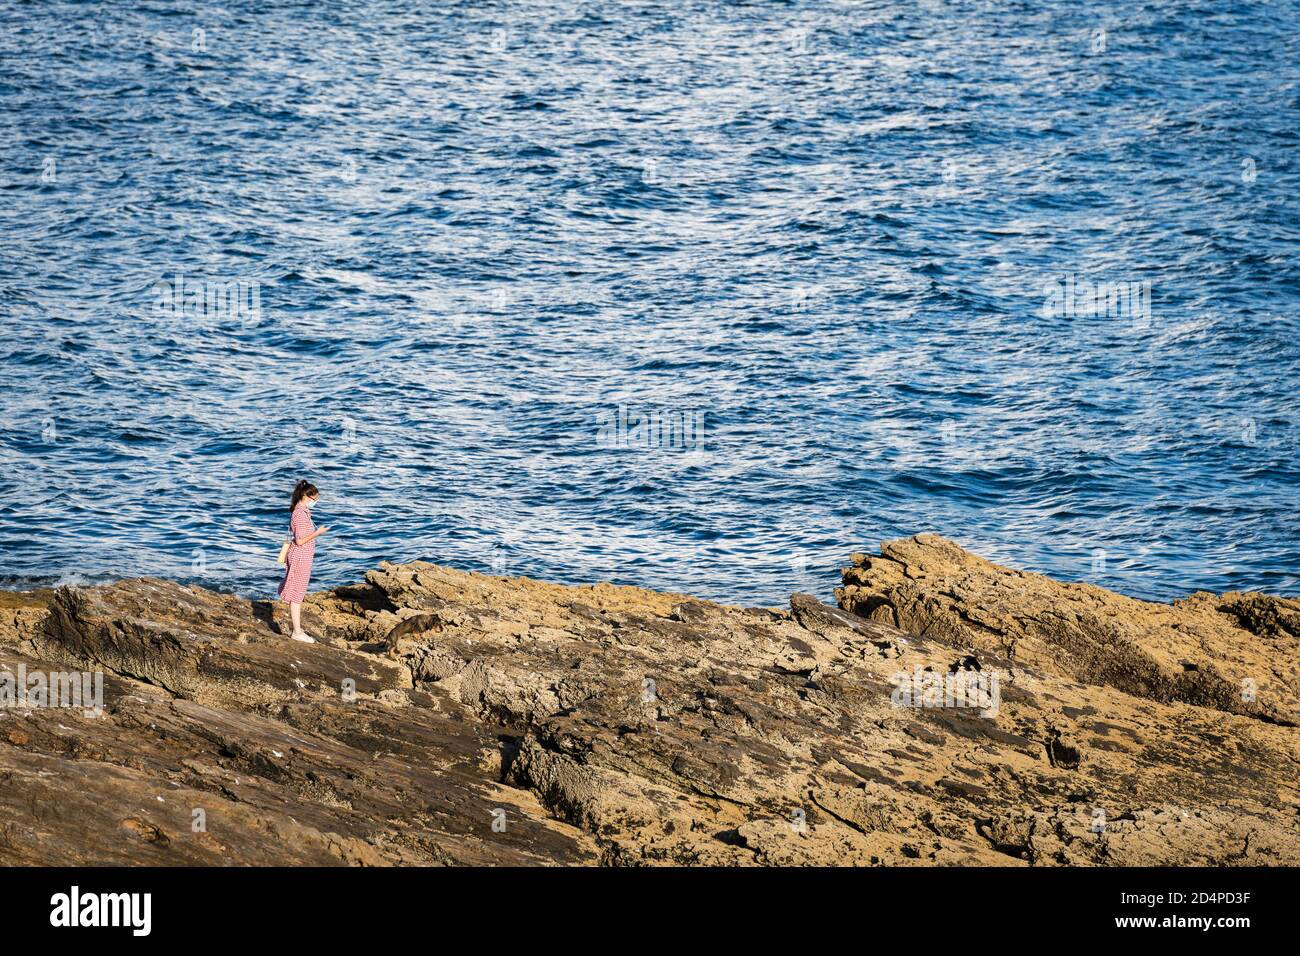 PORTONOVO, SPAIN - AUGUST 15, 2020: A young woman checks her smartphone while enjoying the sunset on the rocks in the Rias Baixas, Galicia. Stock Photo